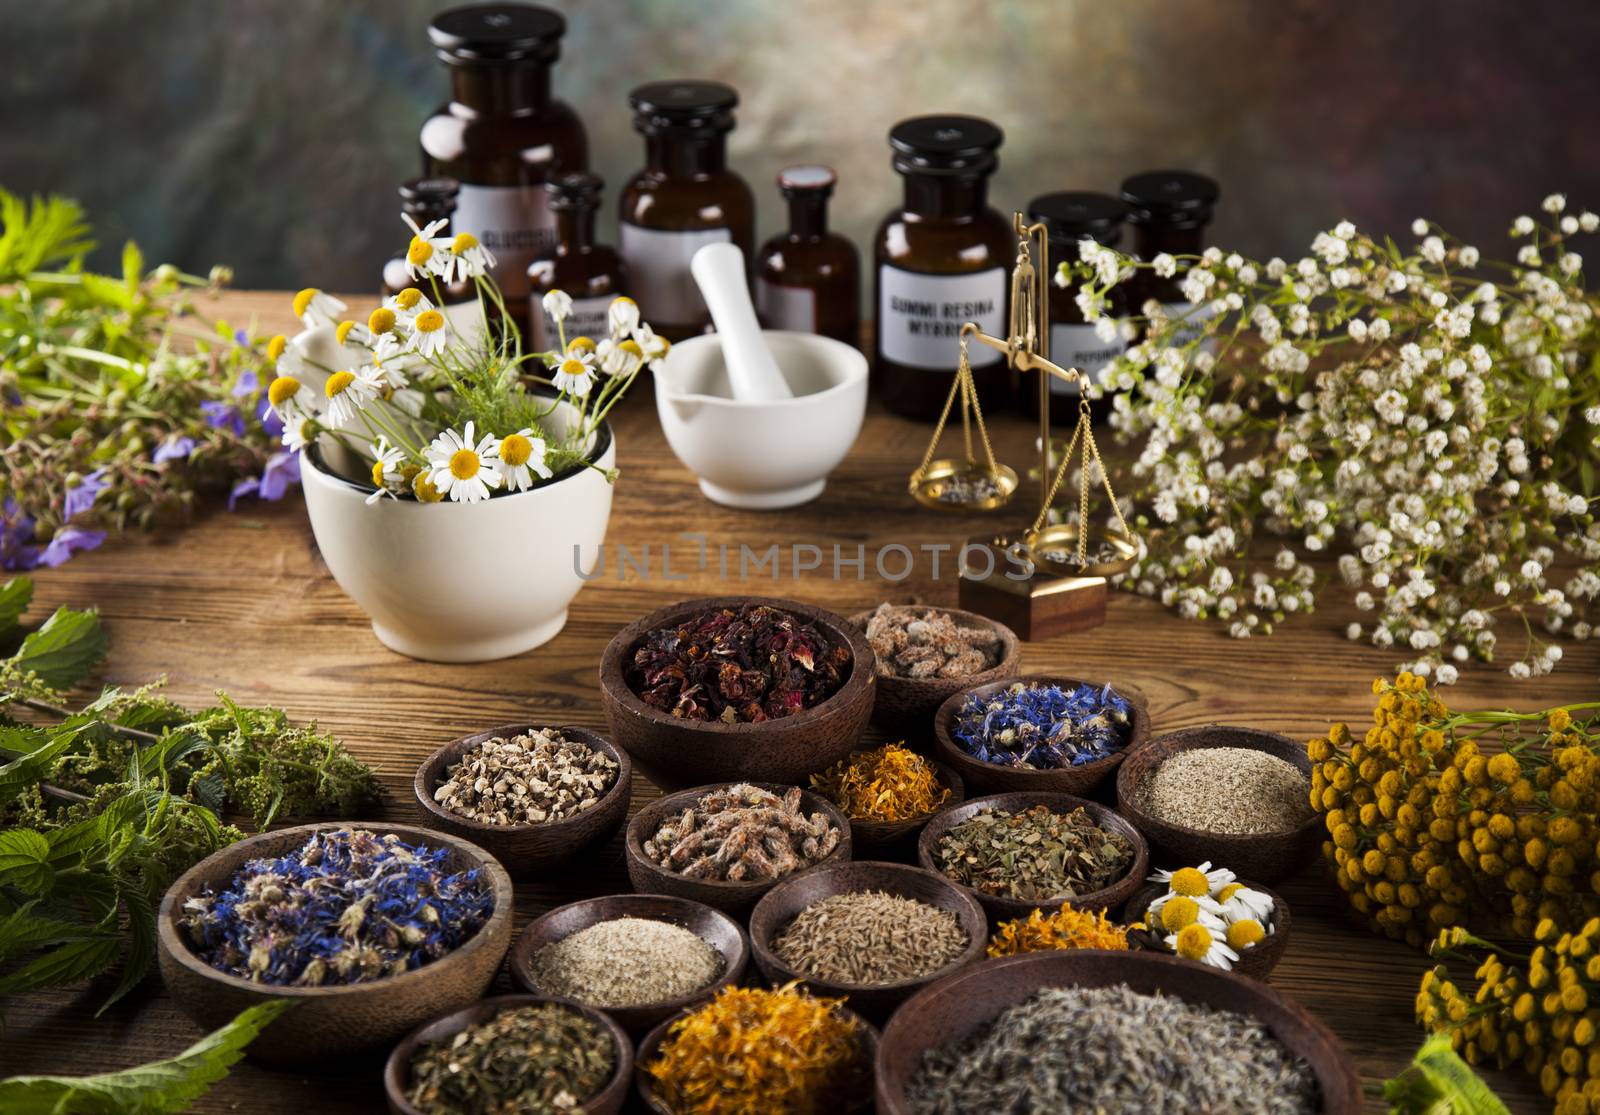 Healing herbs on wooden table, mortar and herbal medicine